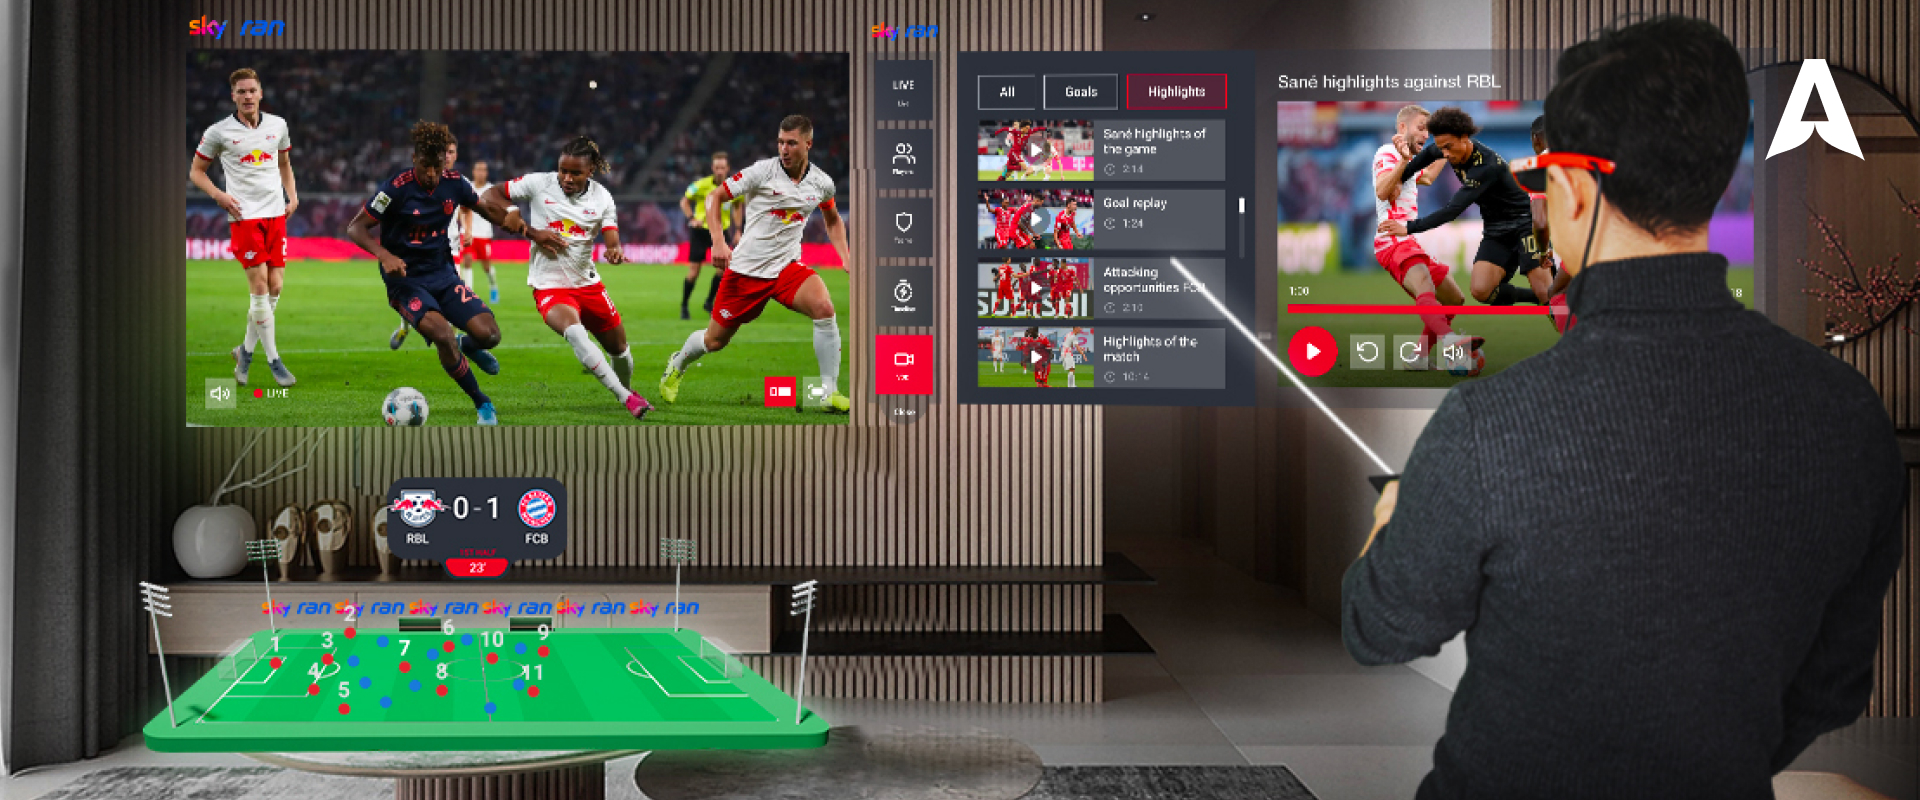 supercup augmented tv